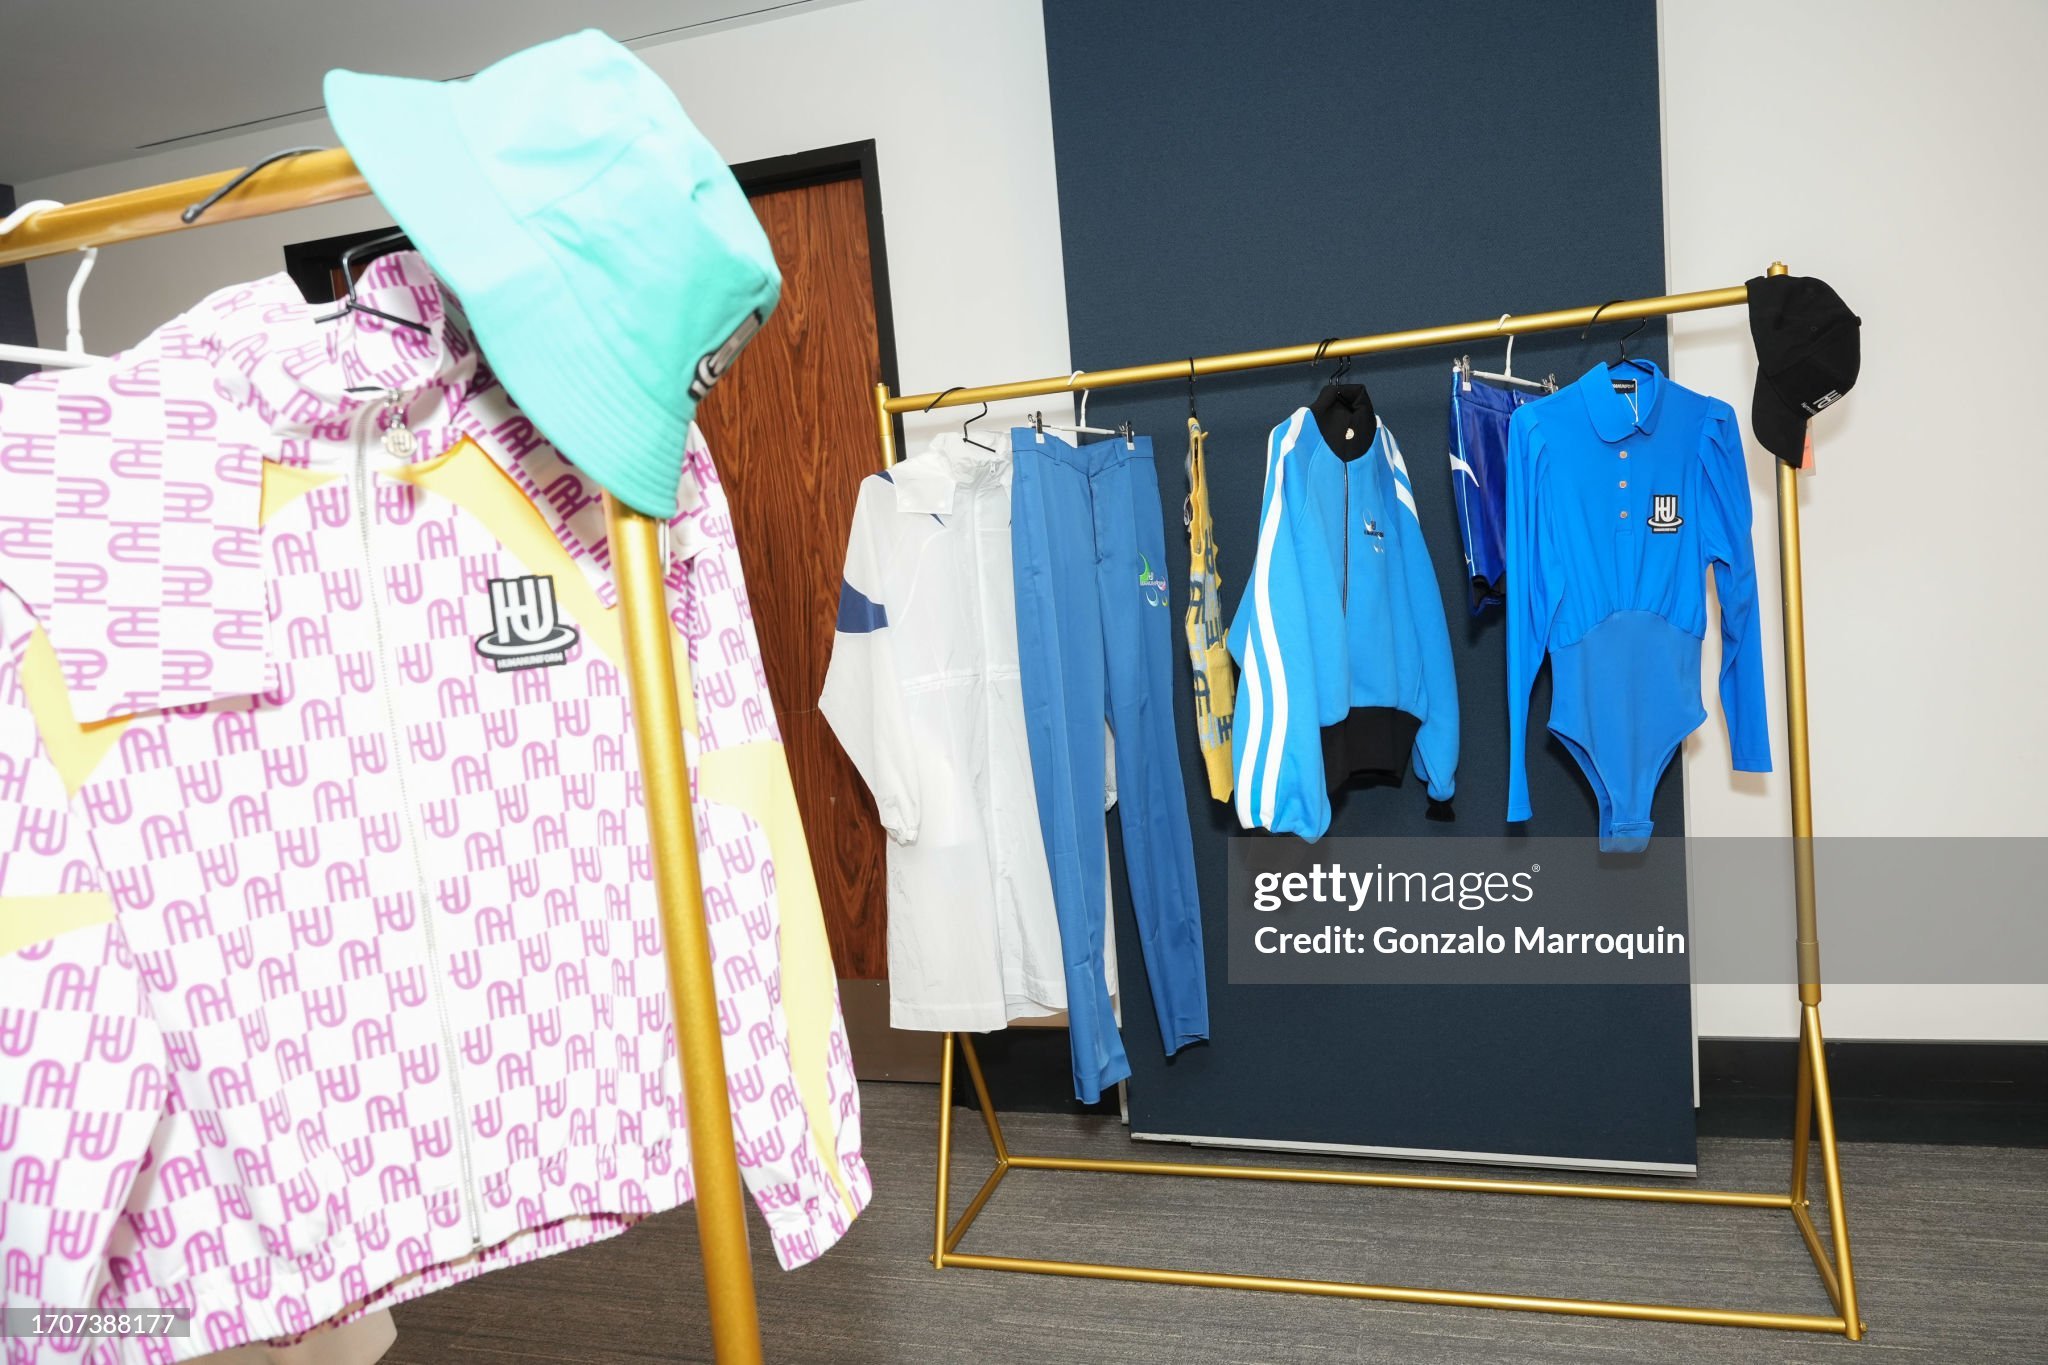 gettyimages-1707388177-2048x2048.jpg